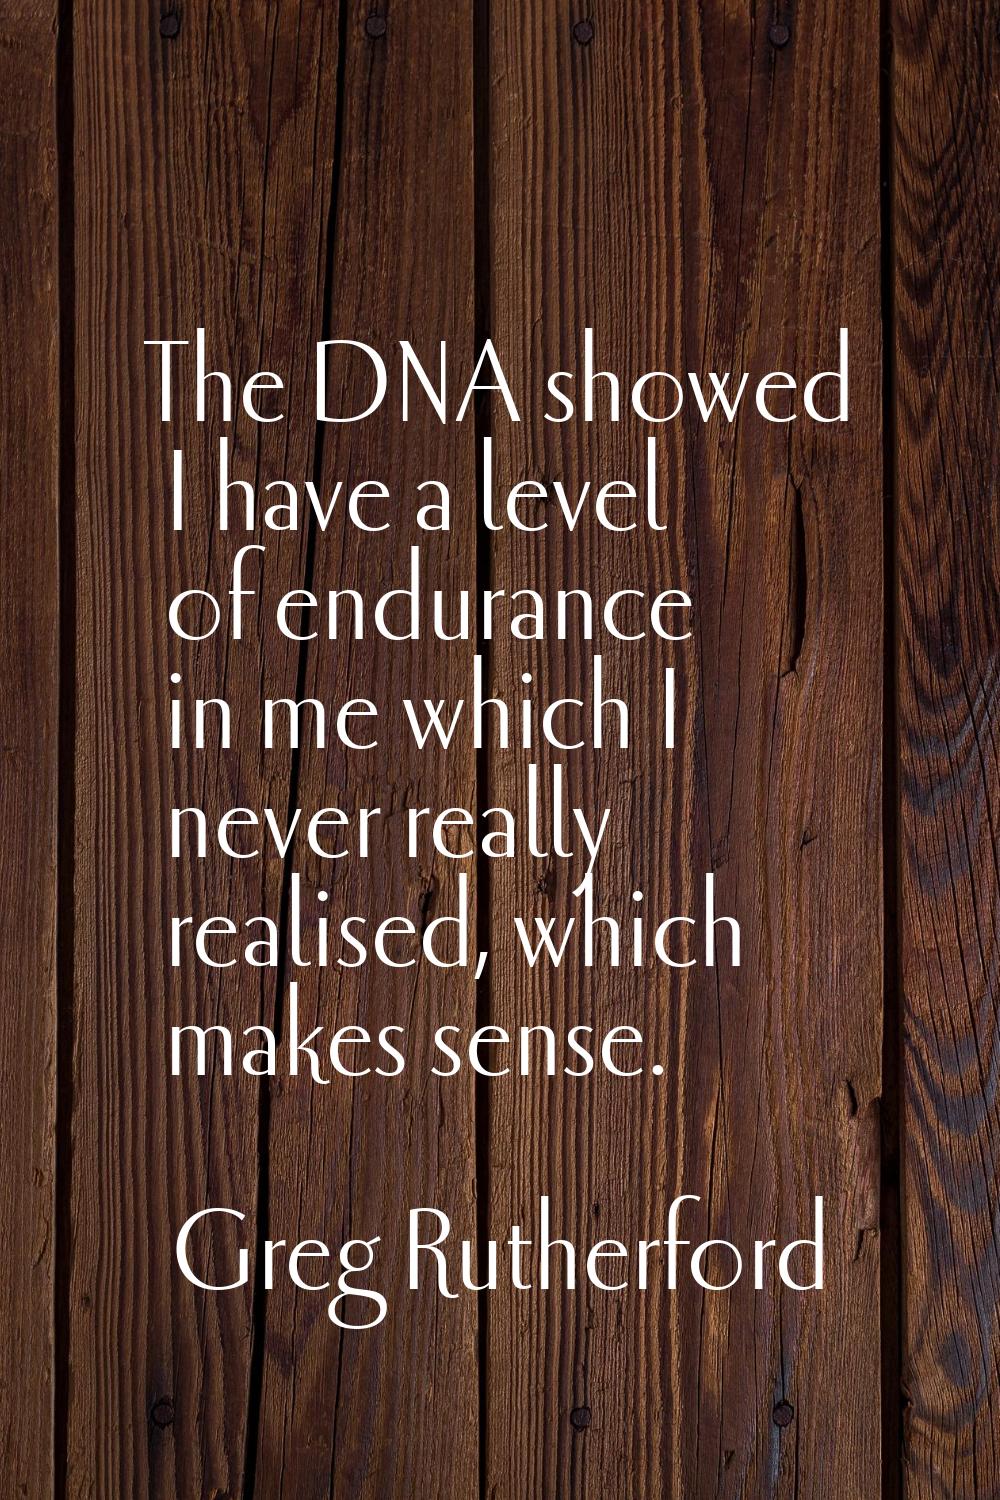 The DNA showed I have a level of endurance in me which I never really realised, which makes sense.